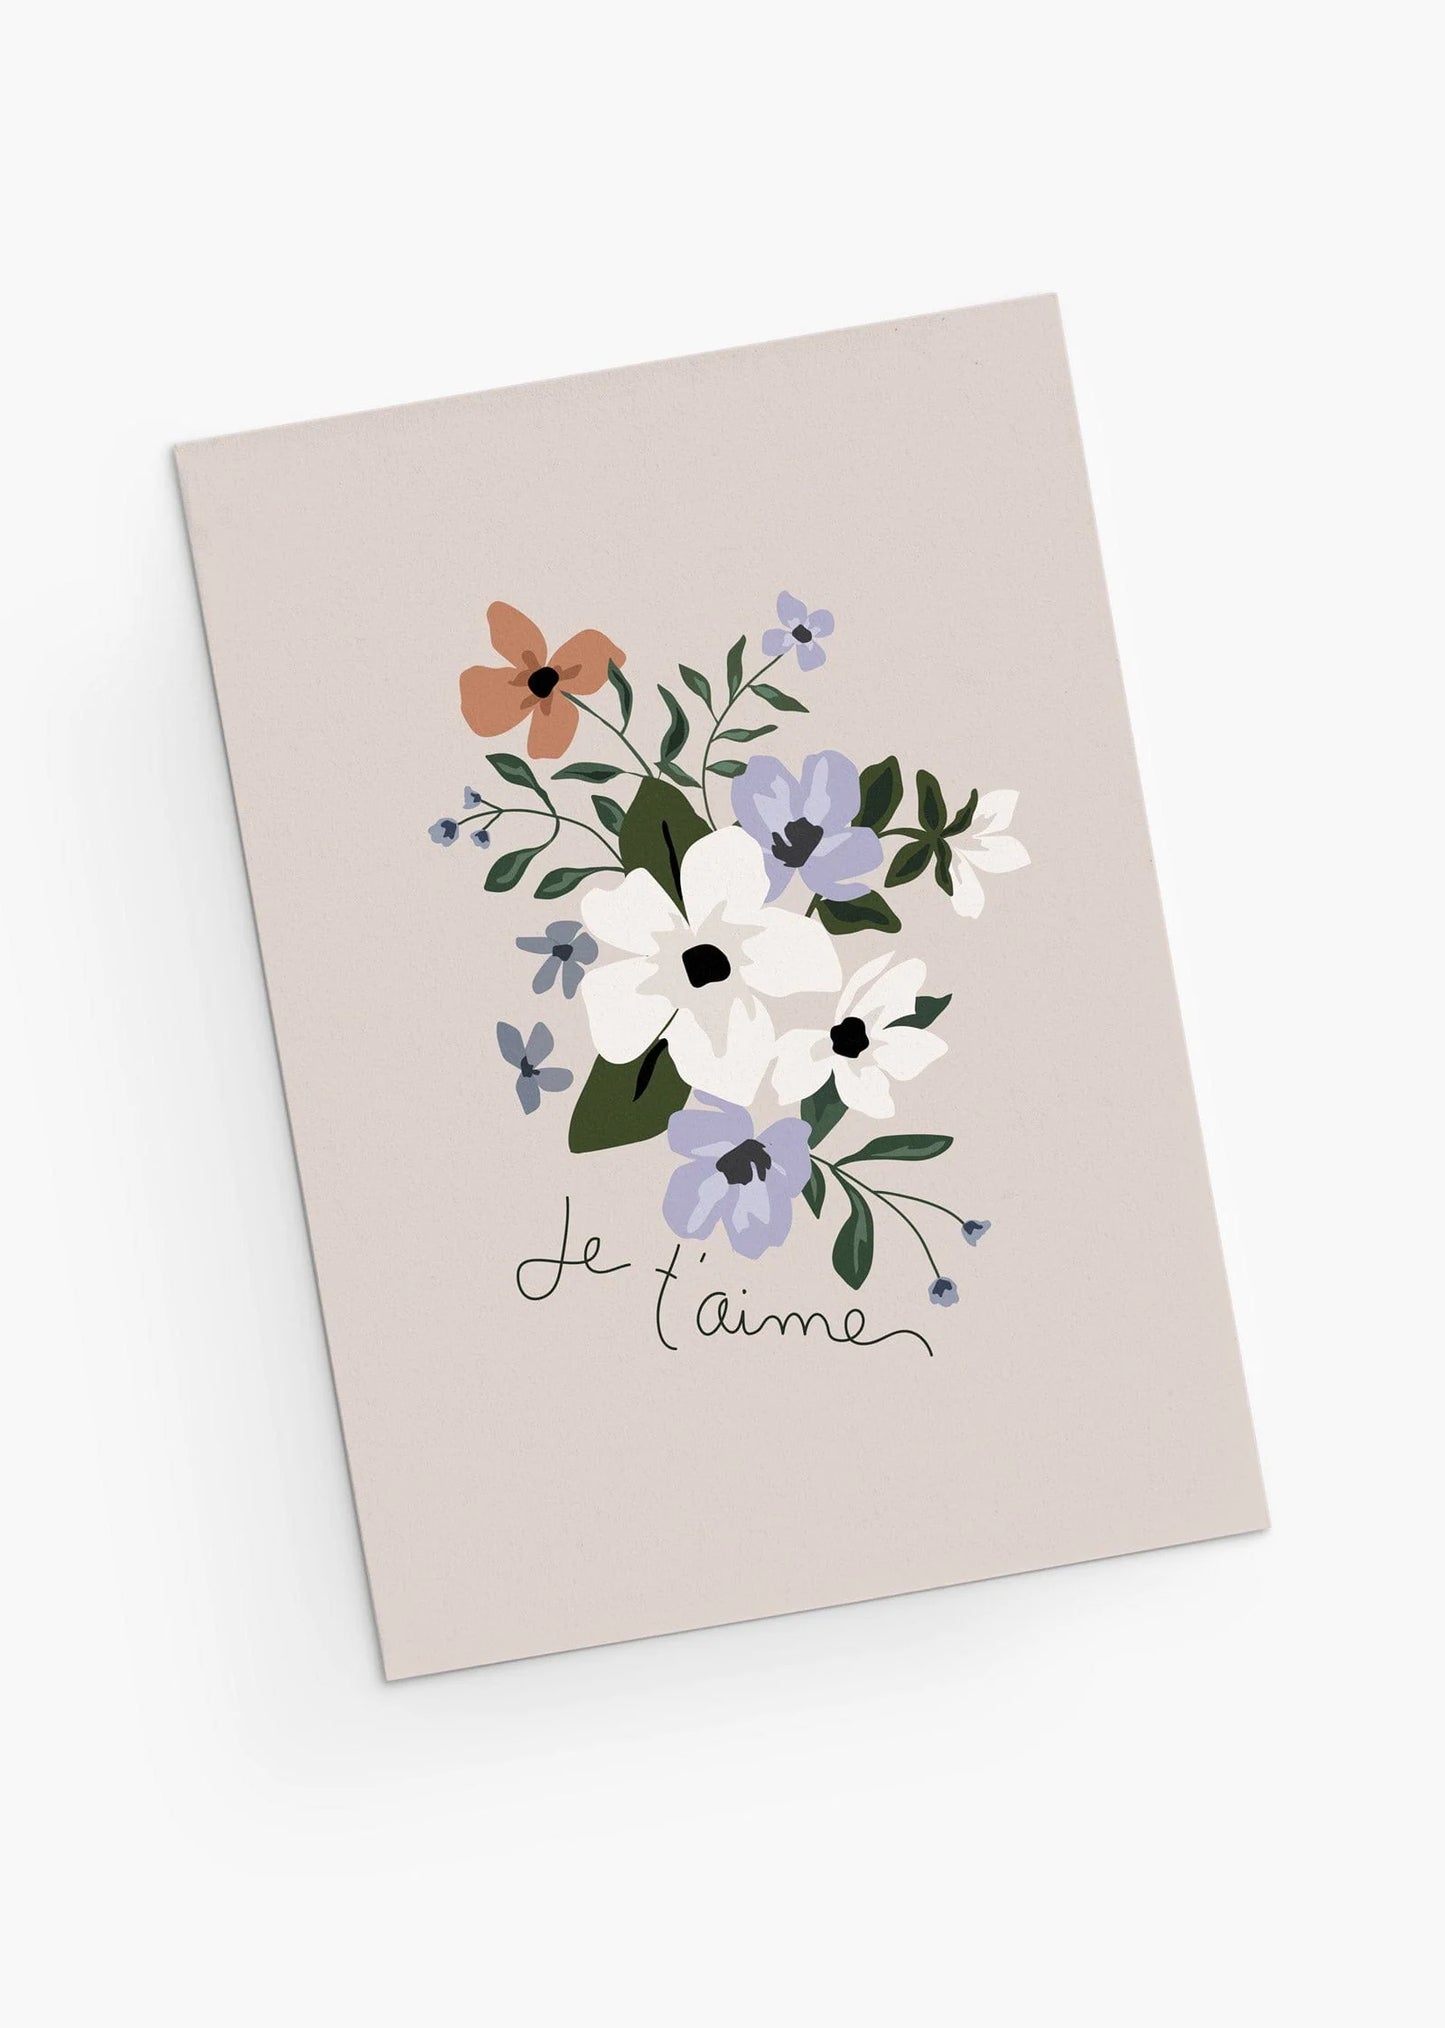 Je t'aime Greeting Card